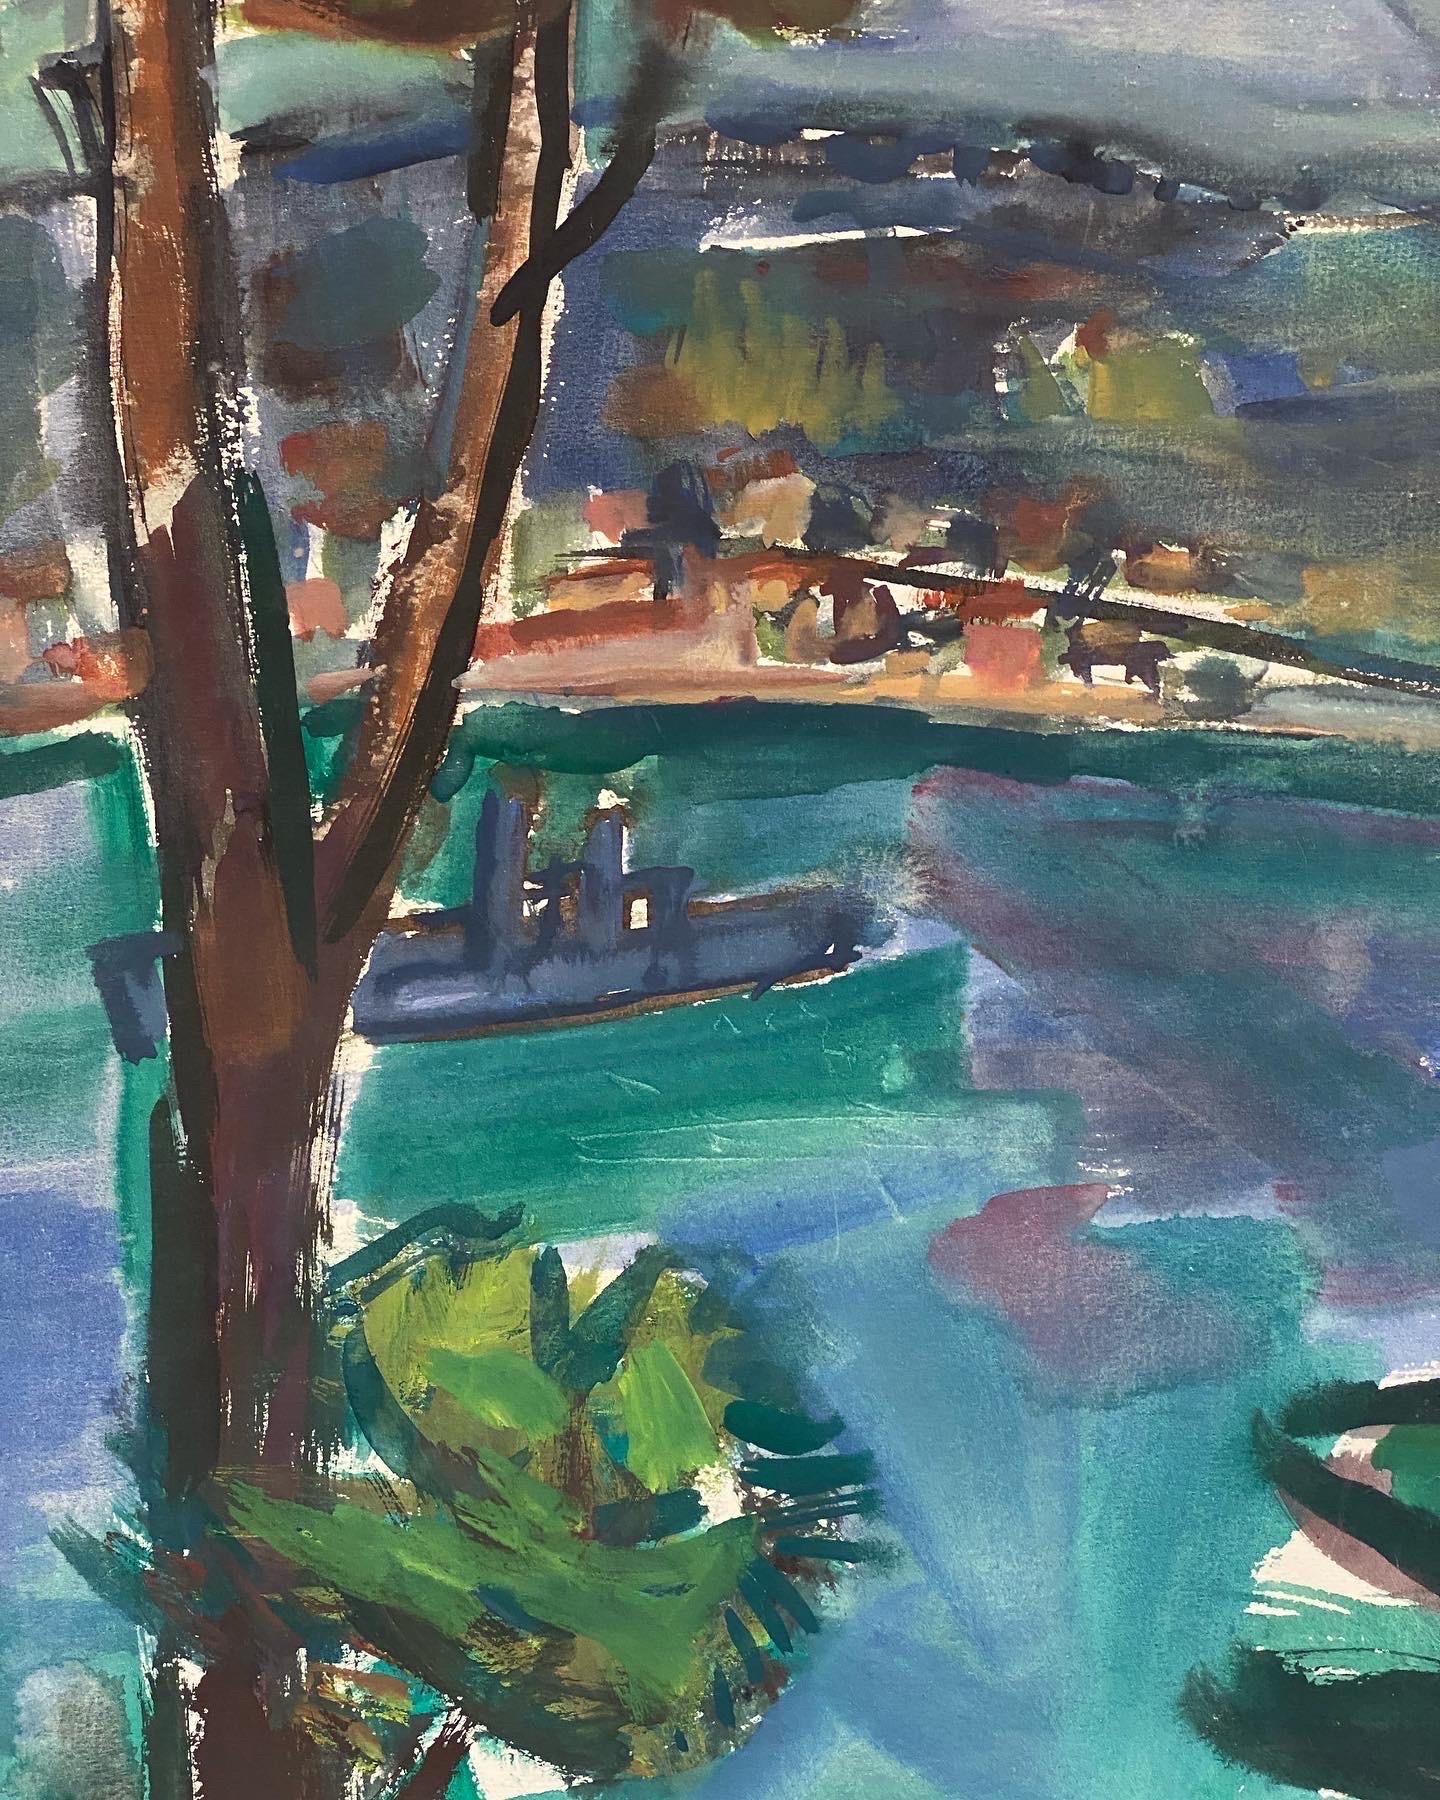 Landscape
Signed by Édouard Righetti (1924-2001)
Inscribed Verso on back

oil/gouache painting on artist paper, beautifully painted.
very good condition
size: 19.5 x inches x 14 inches
provenance: all the paintings we have for sale by this